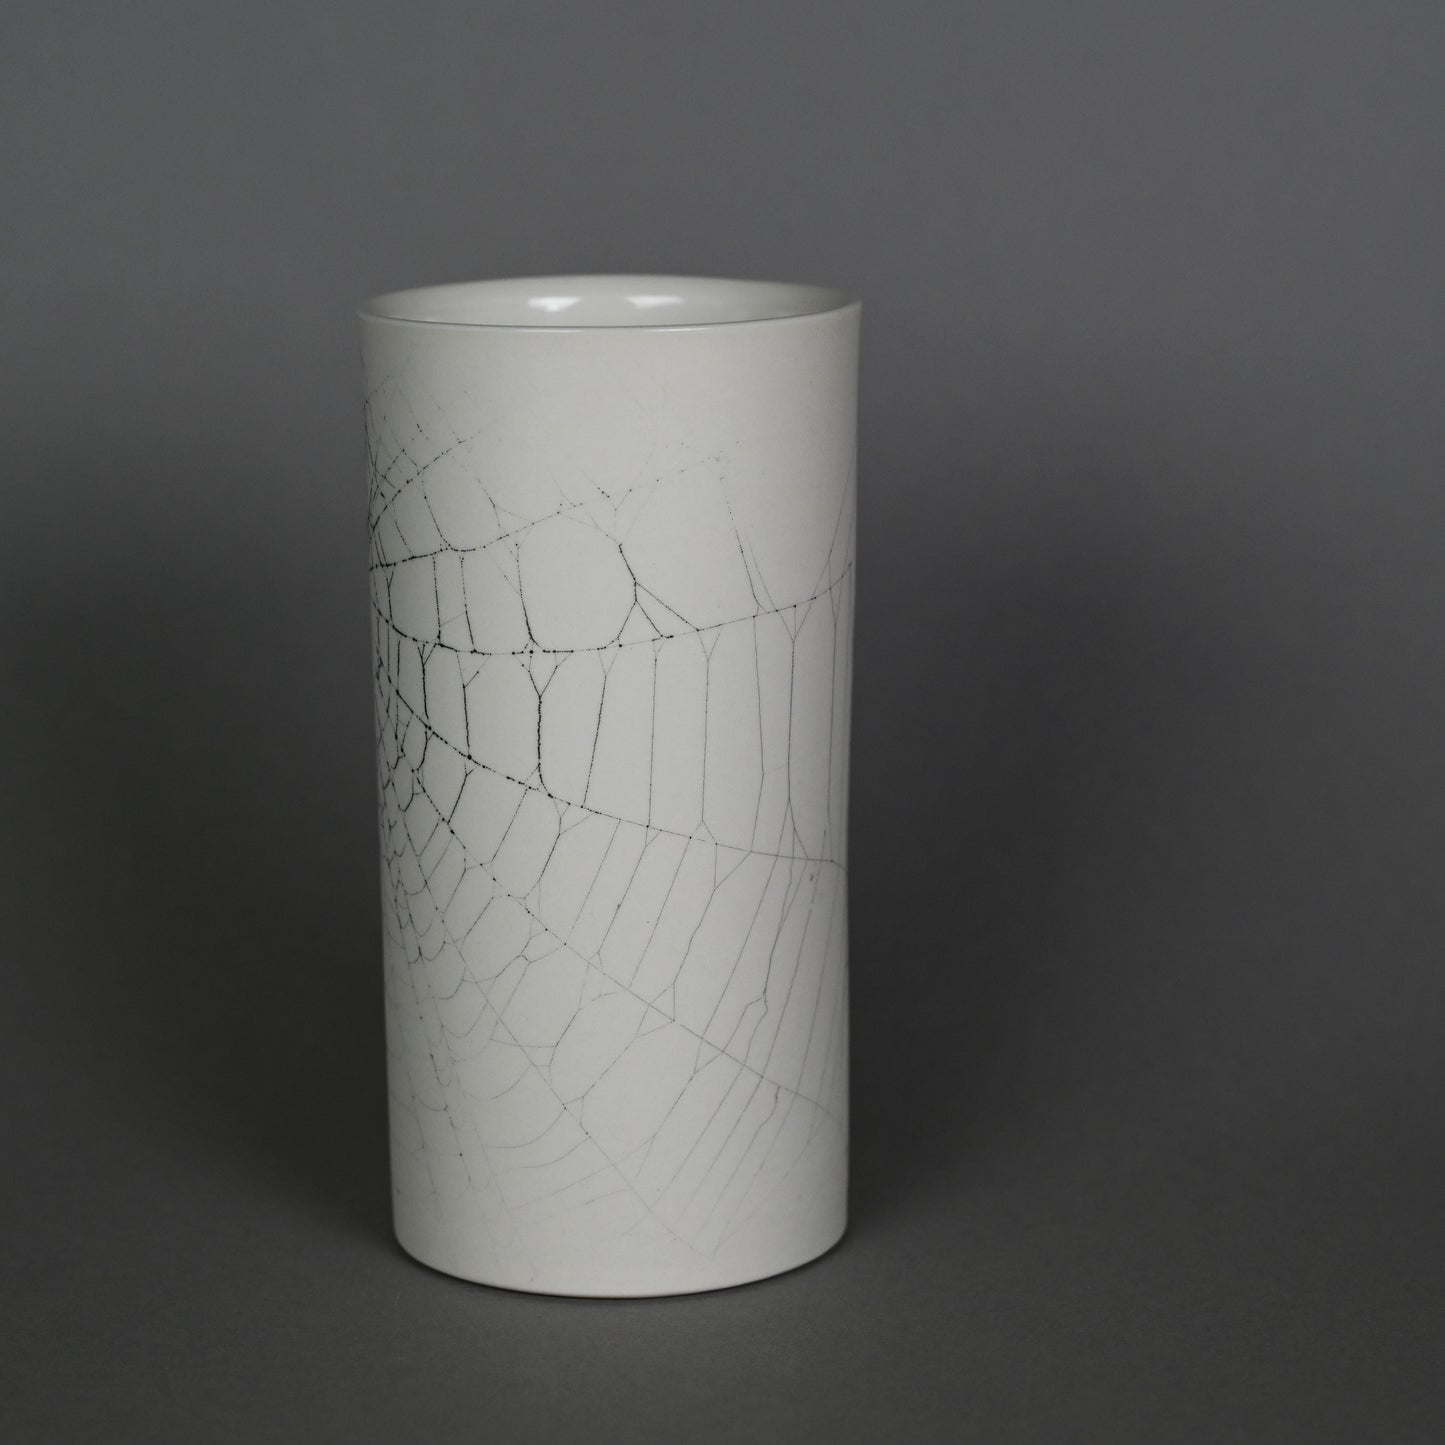 Web on Clay (192), Collected September 19, 2022